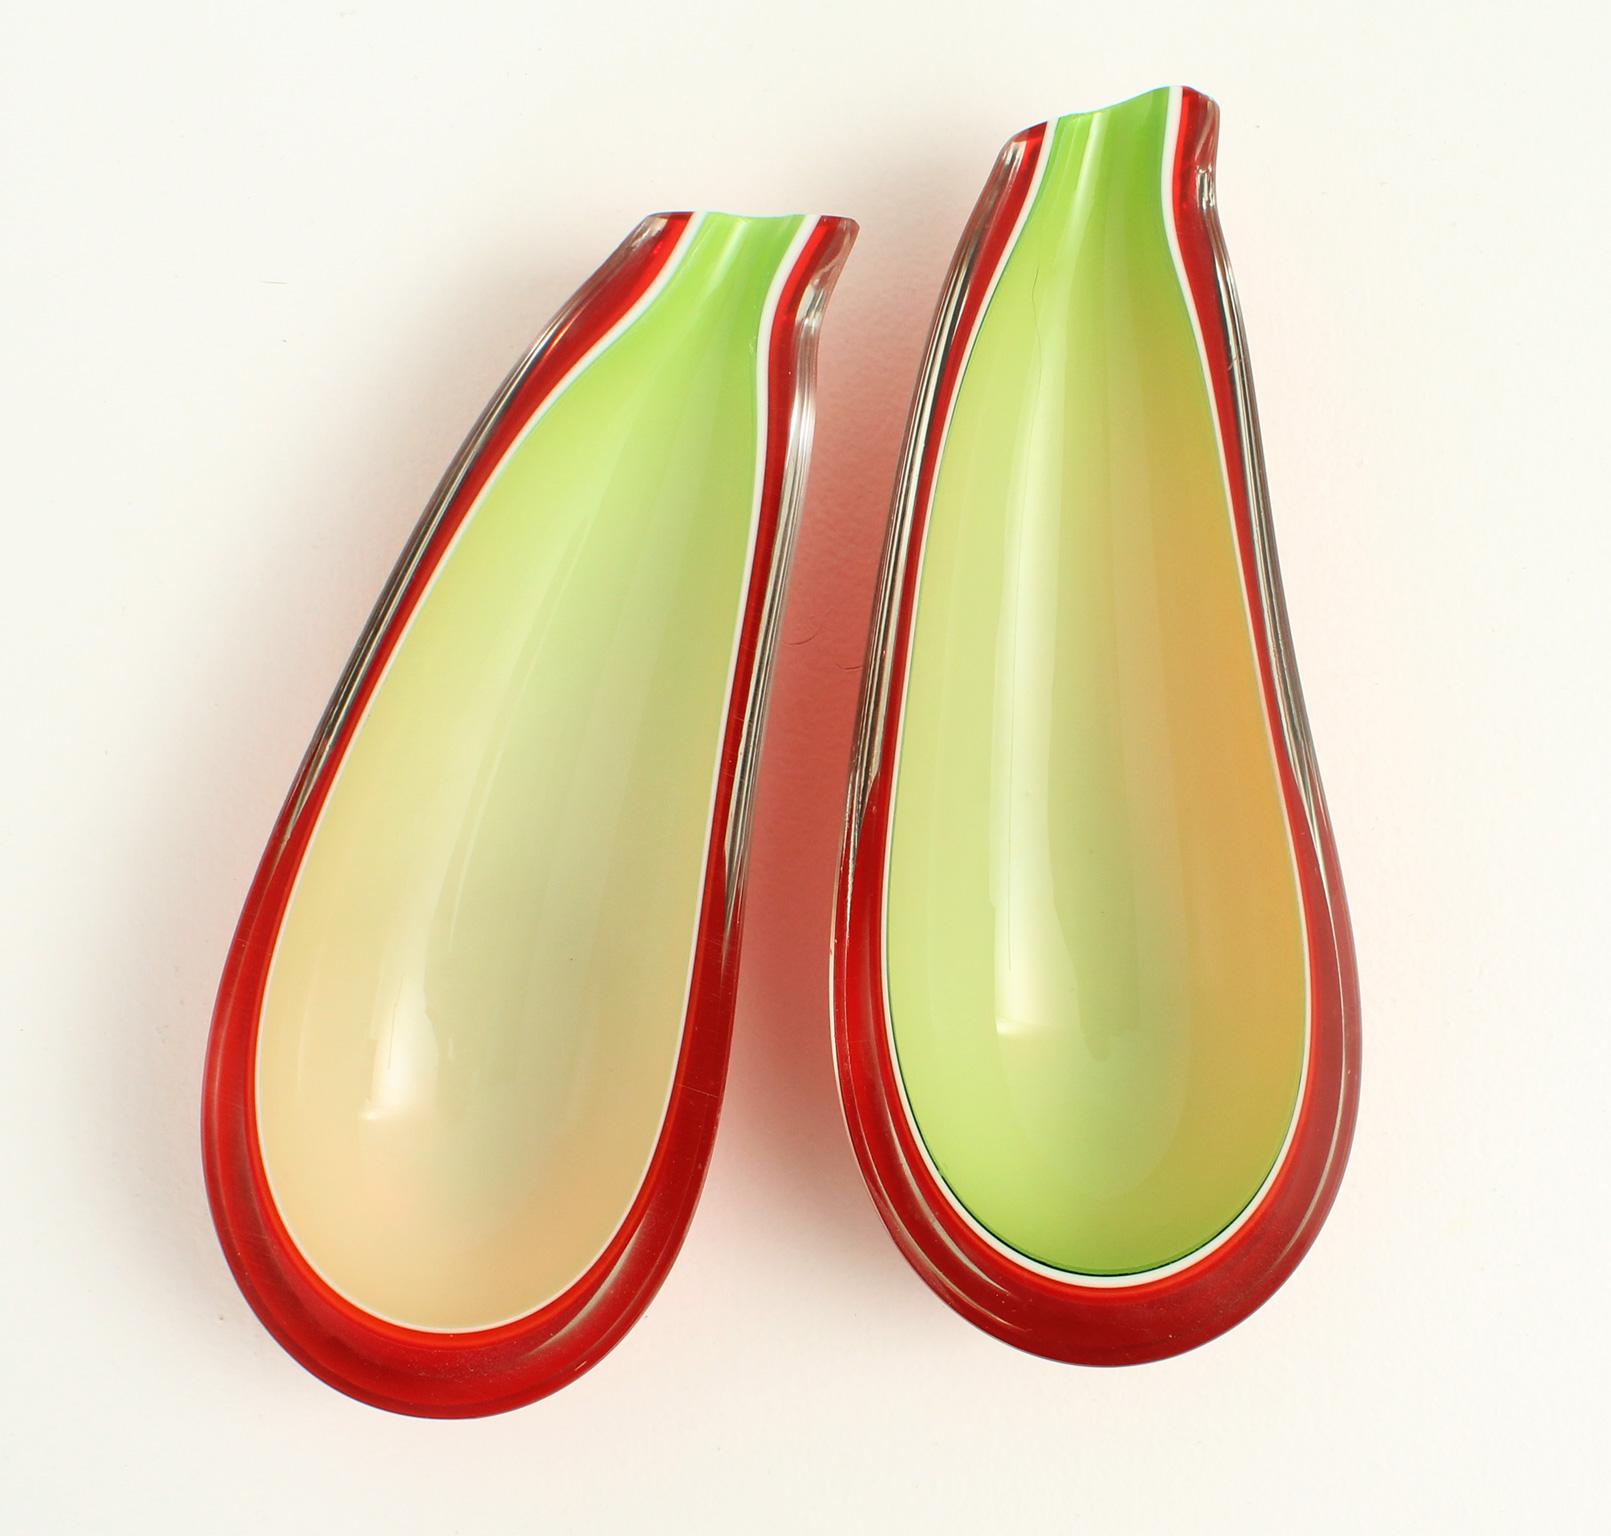 Glass Pair of Fratelli Toso Eggplant Bowls, 1950's For Sale